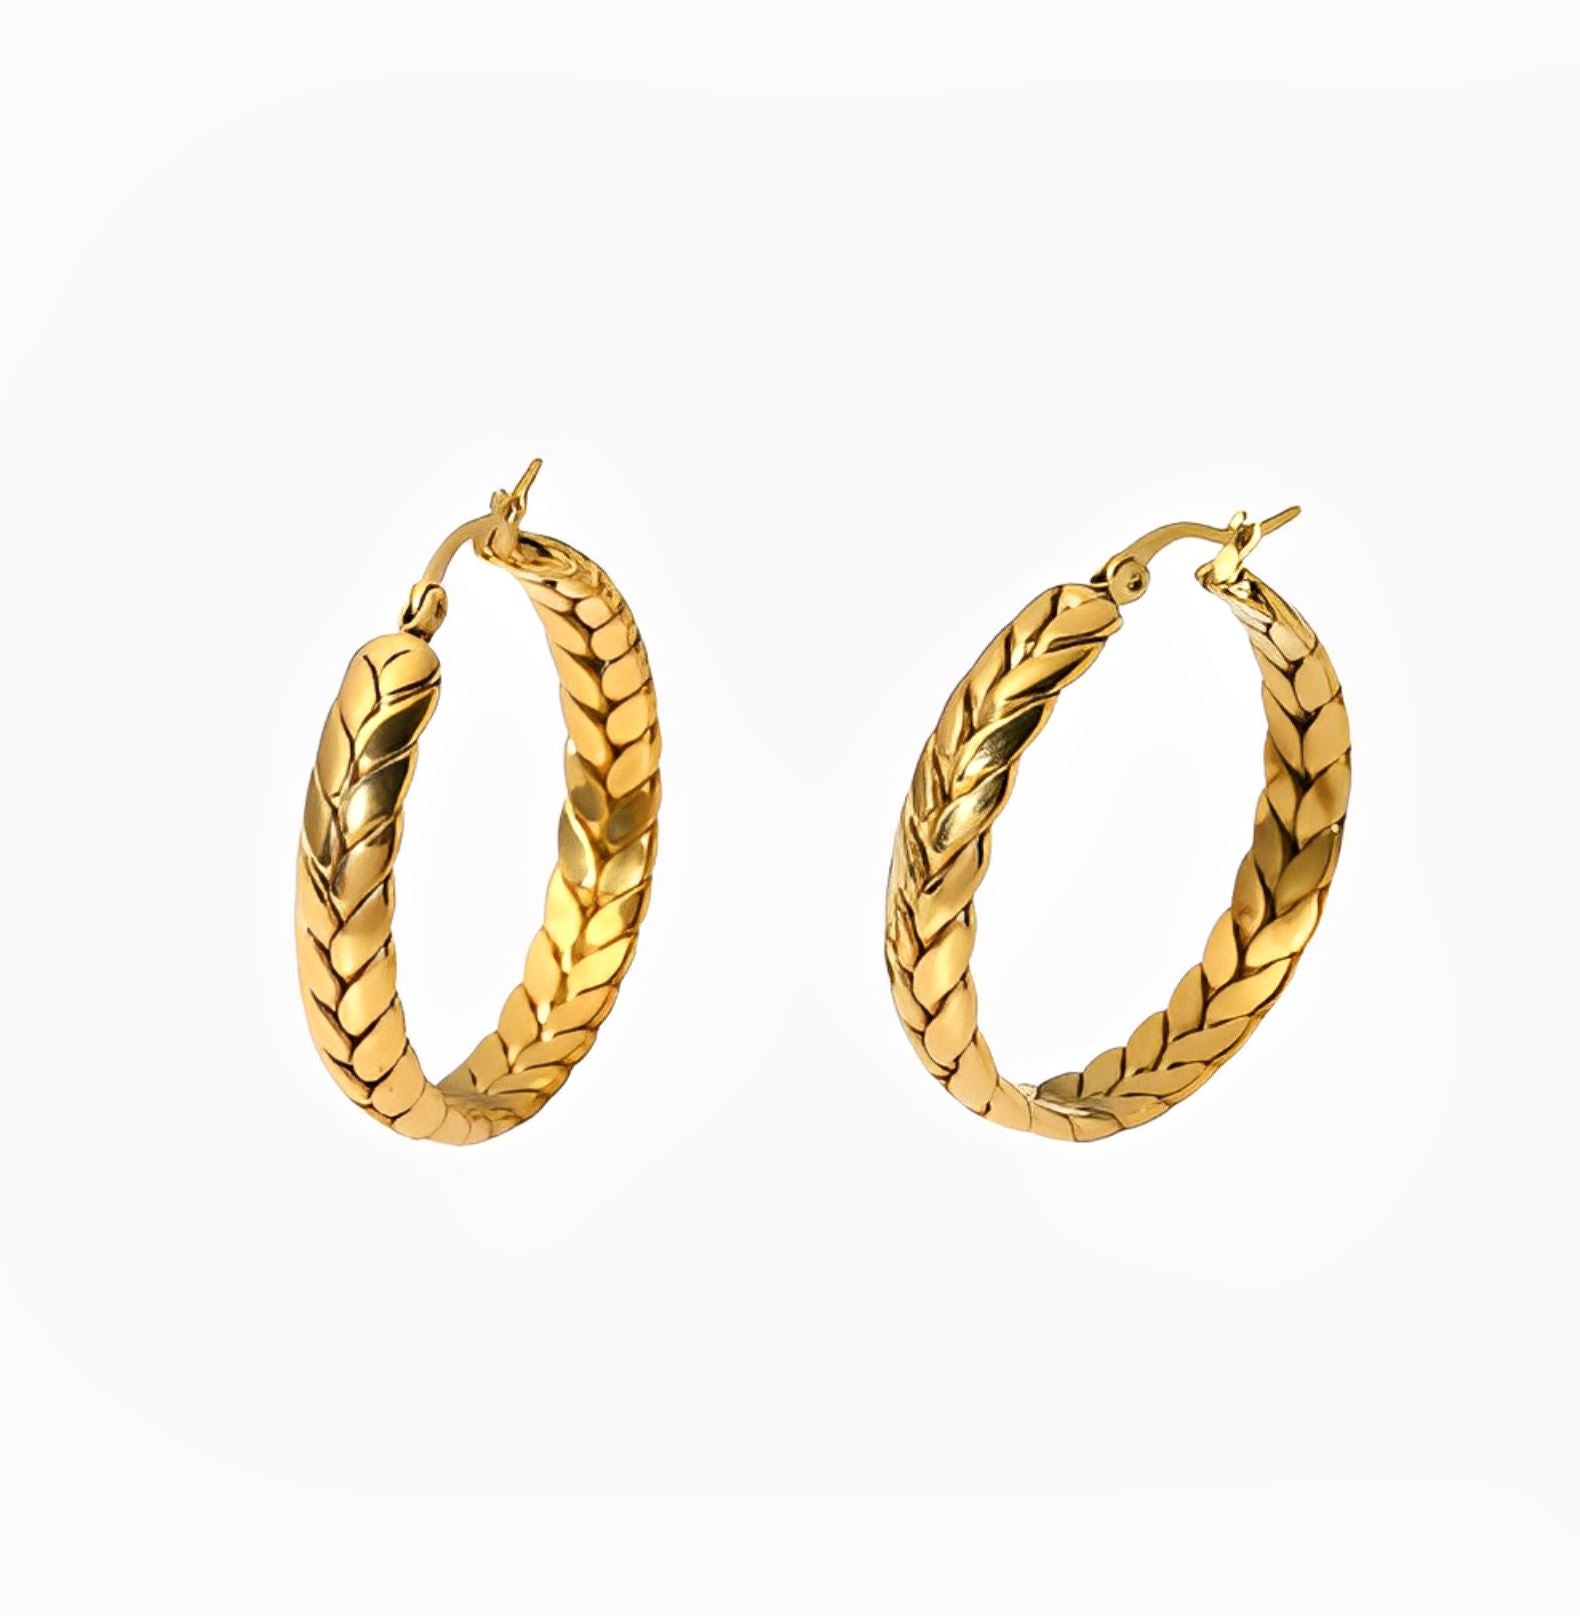 WOVEN HOOP EARRINGS braclet Yubama Jewelry Online Store - The Elegant Designs of Gold and Silver ! 